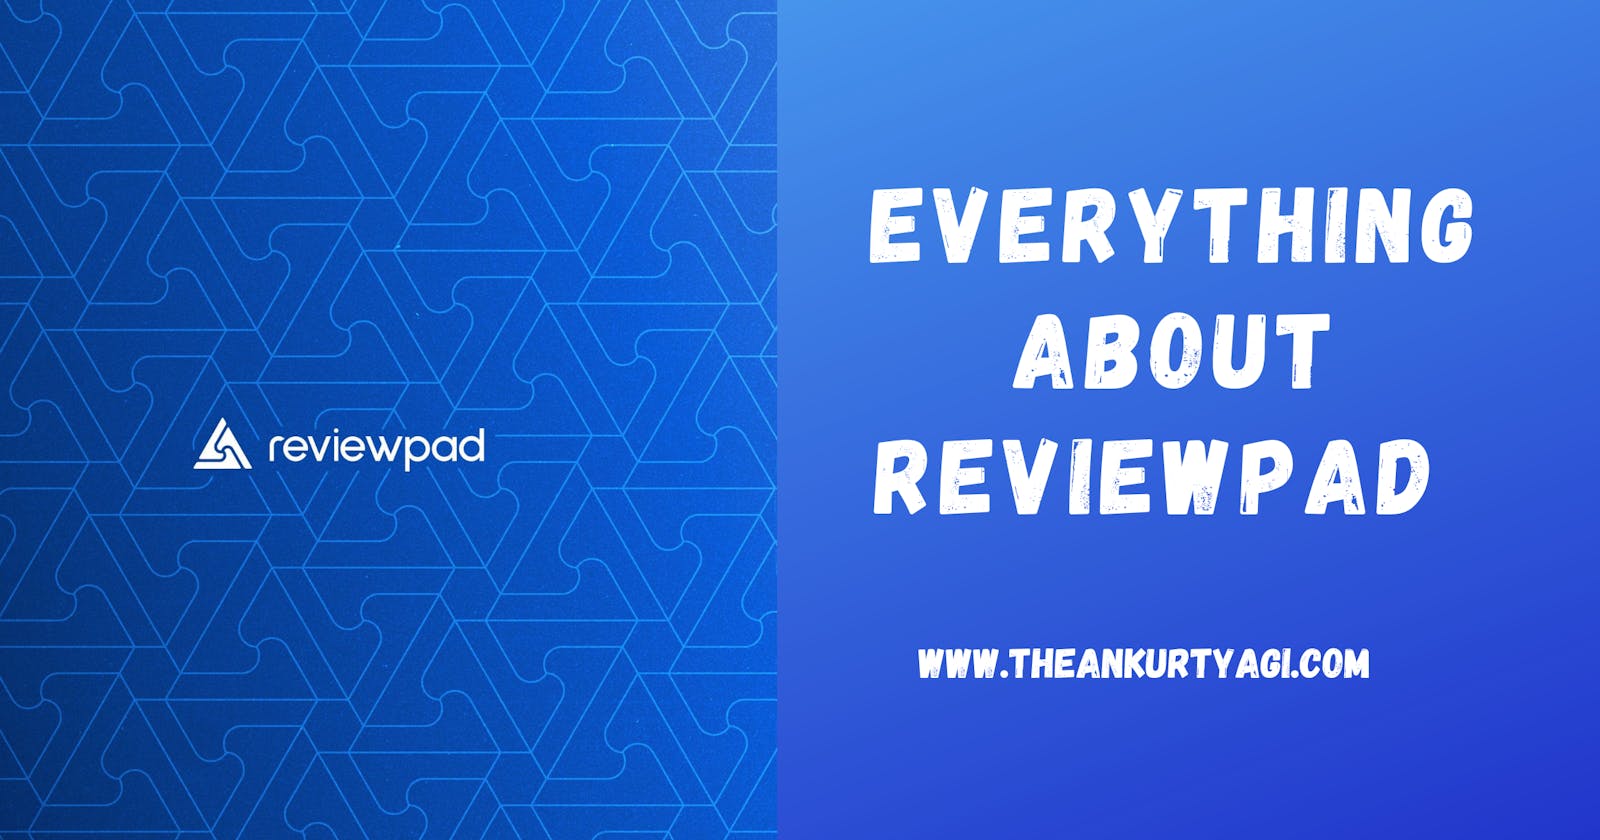 What Makes Reviewpad the Best Pull Request Management System